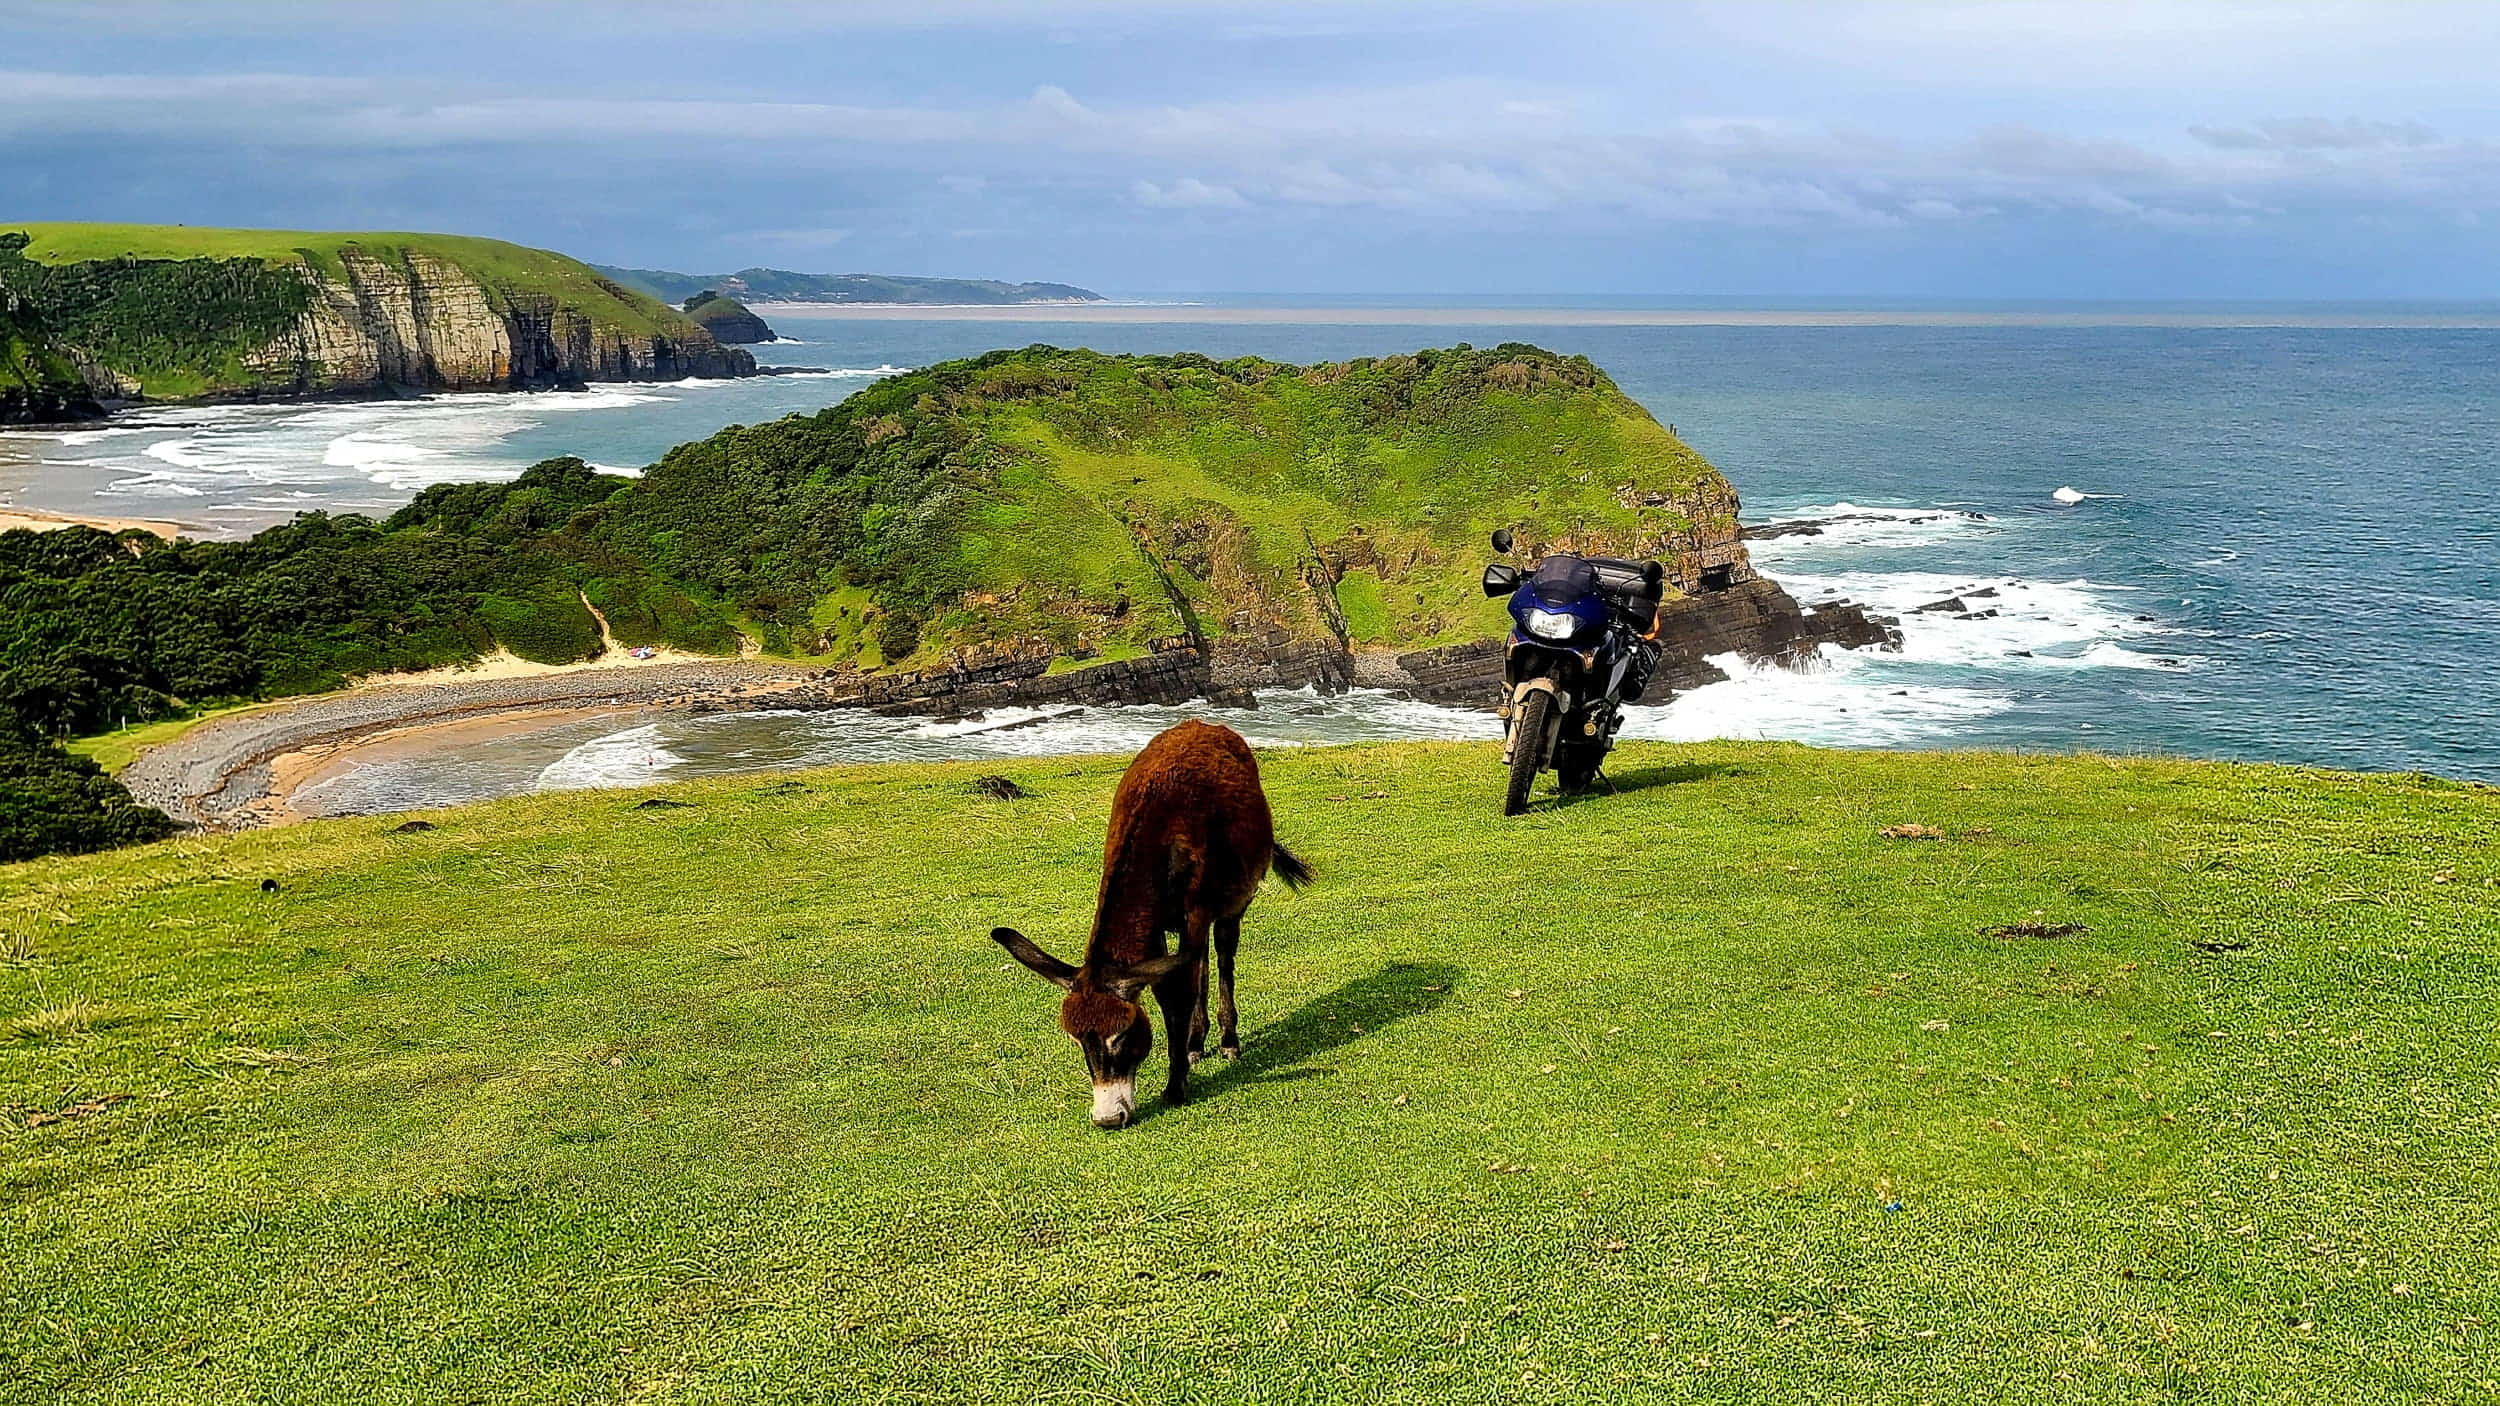 motorcycle parked with a donkey andgreen hills  dropping into the  ocean behind